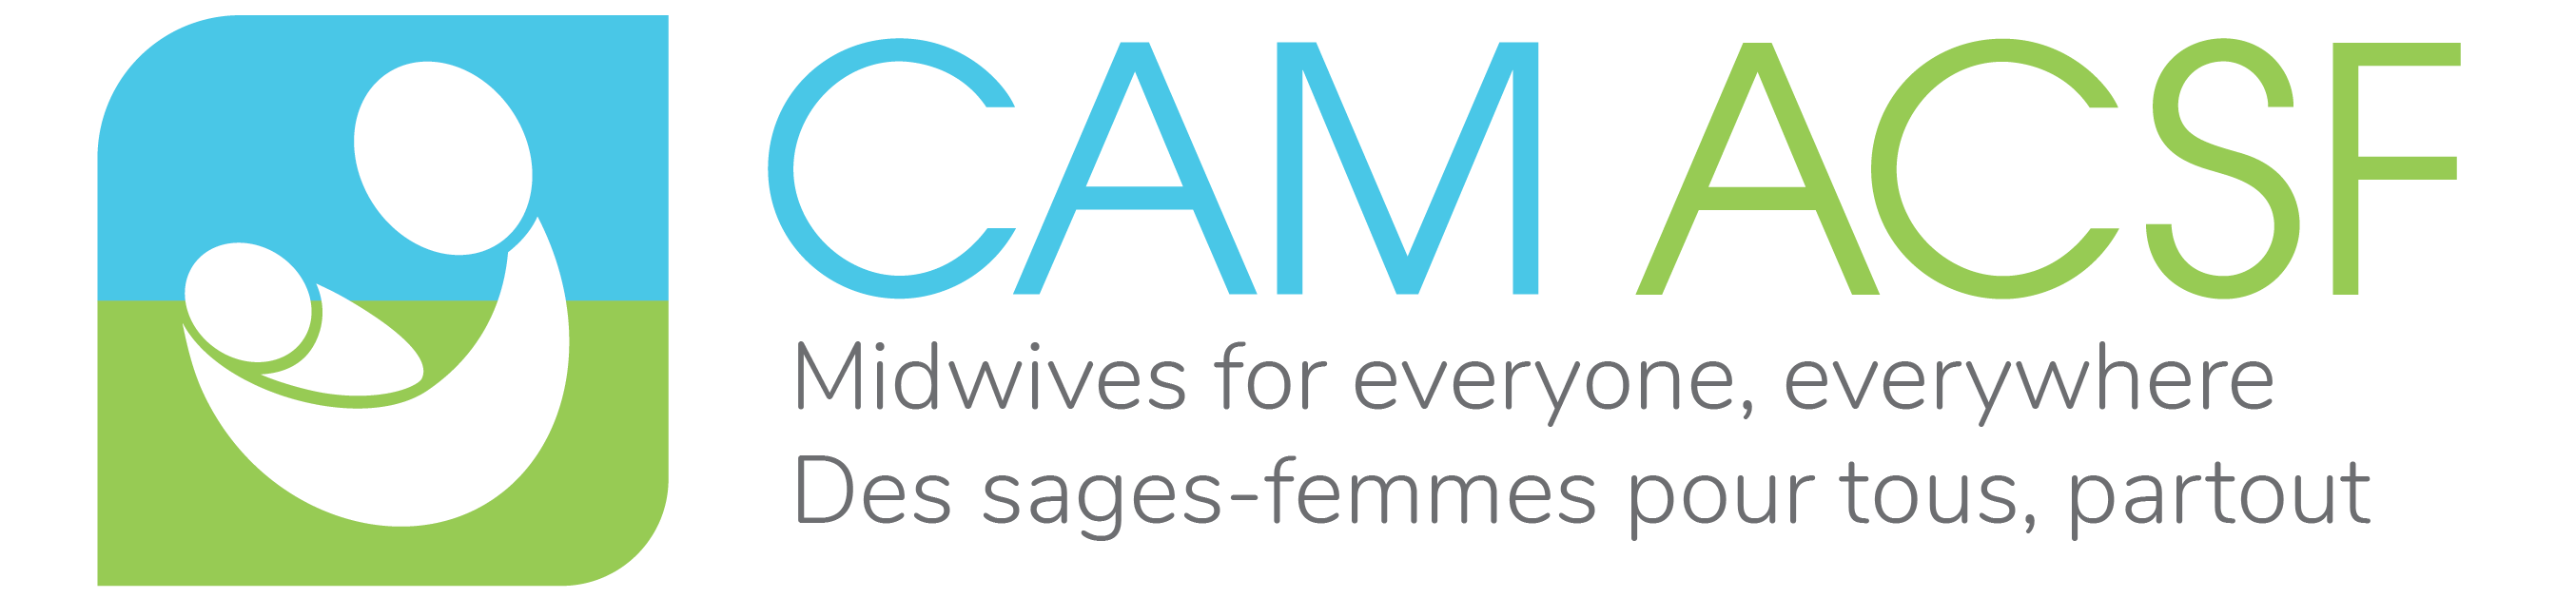 Canadian Association of Midwives